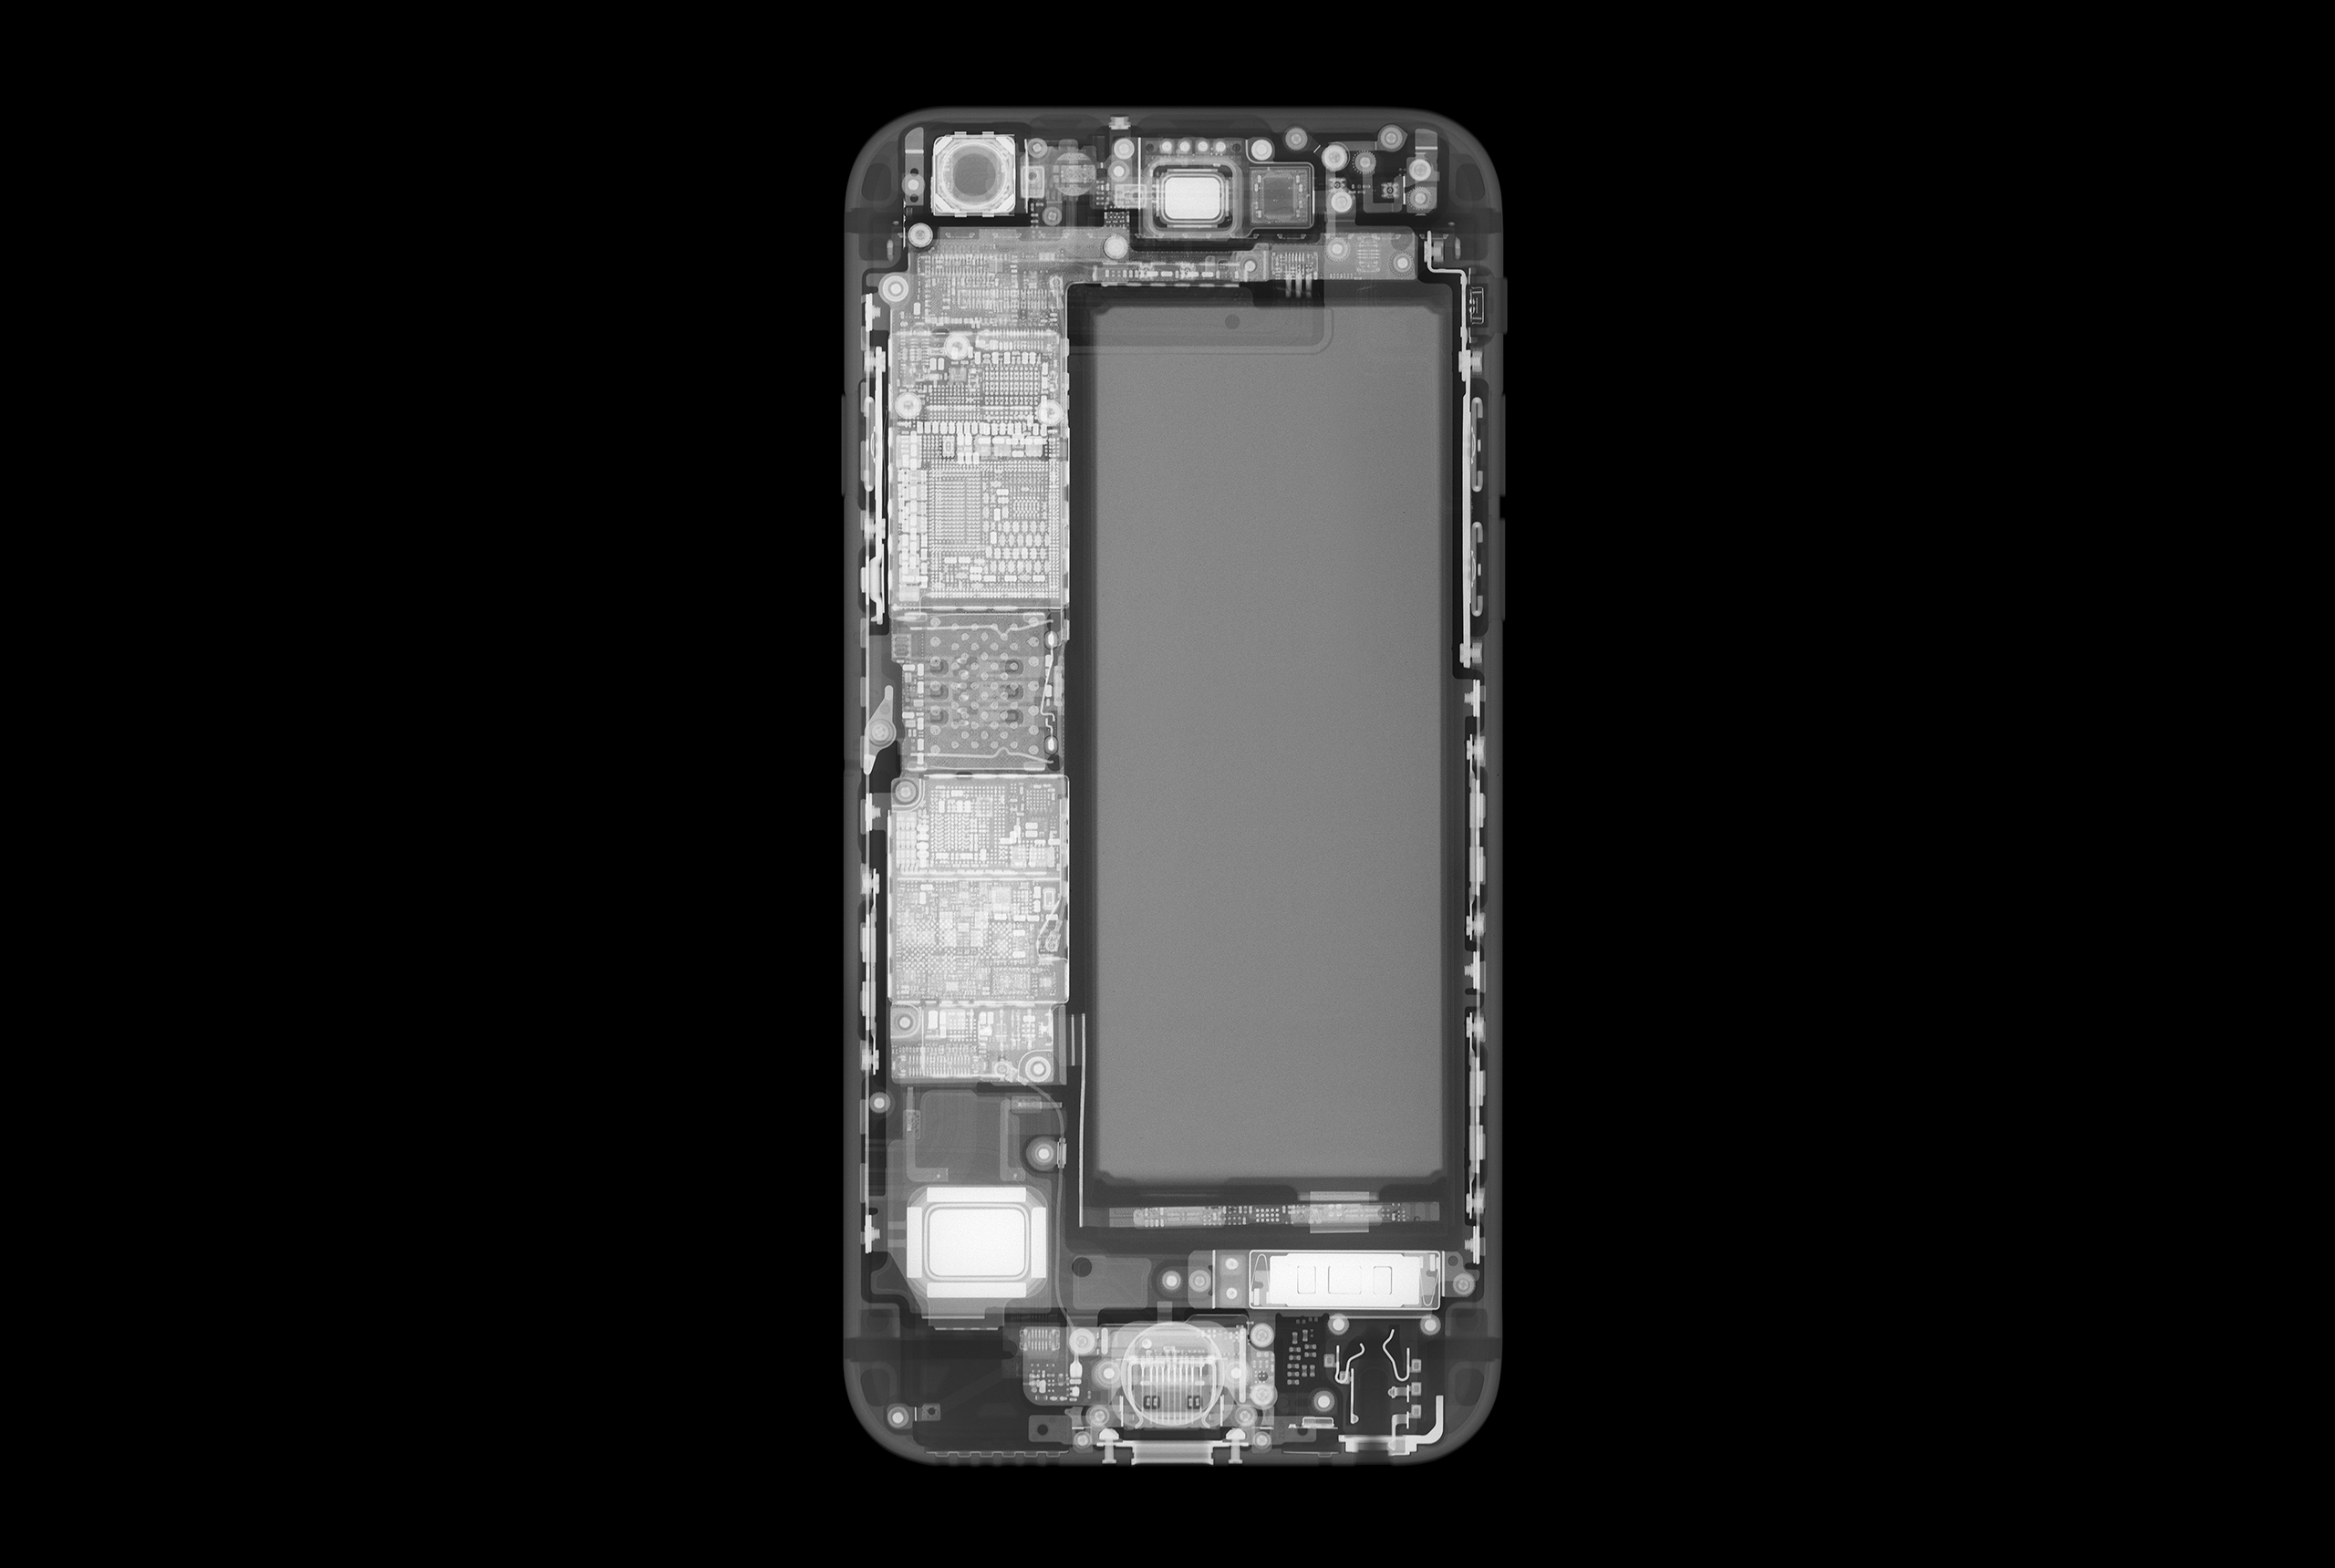 An X-ray image of a smartphone. (Nick Veasey—Getty Images)